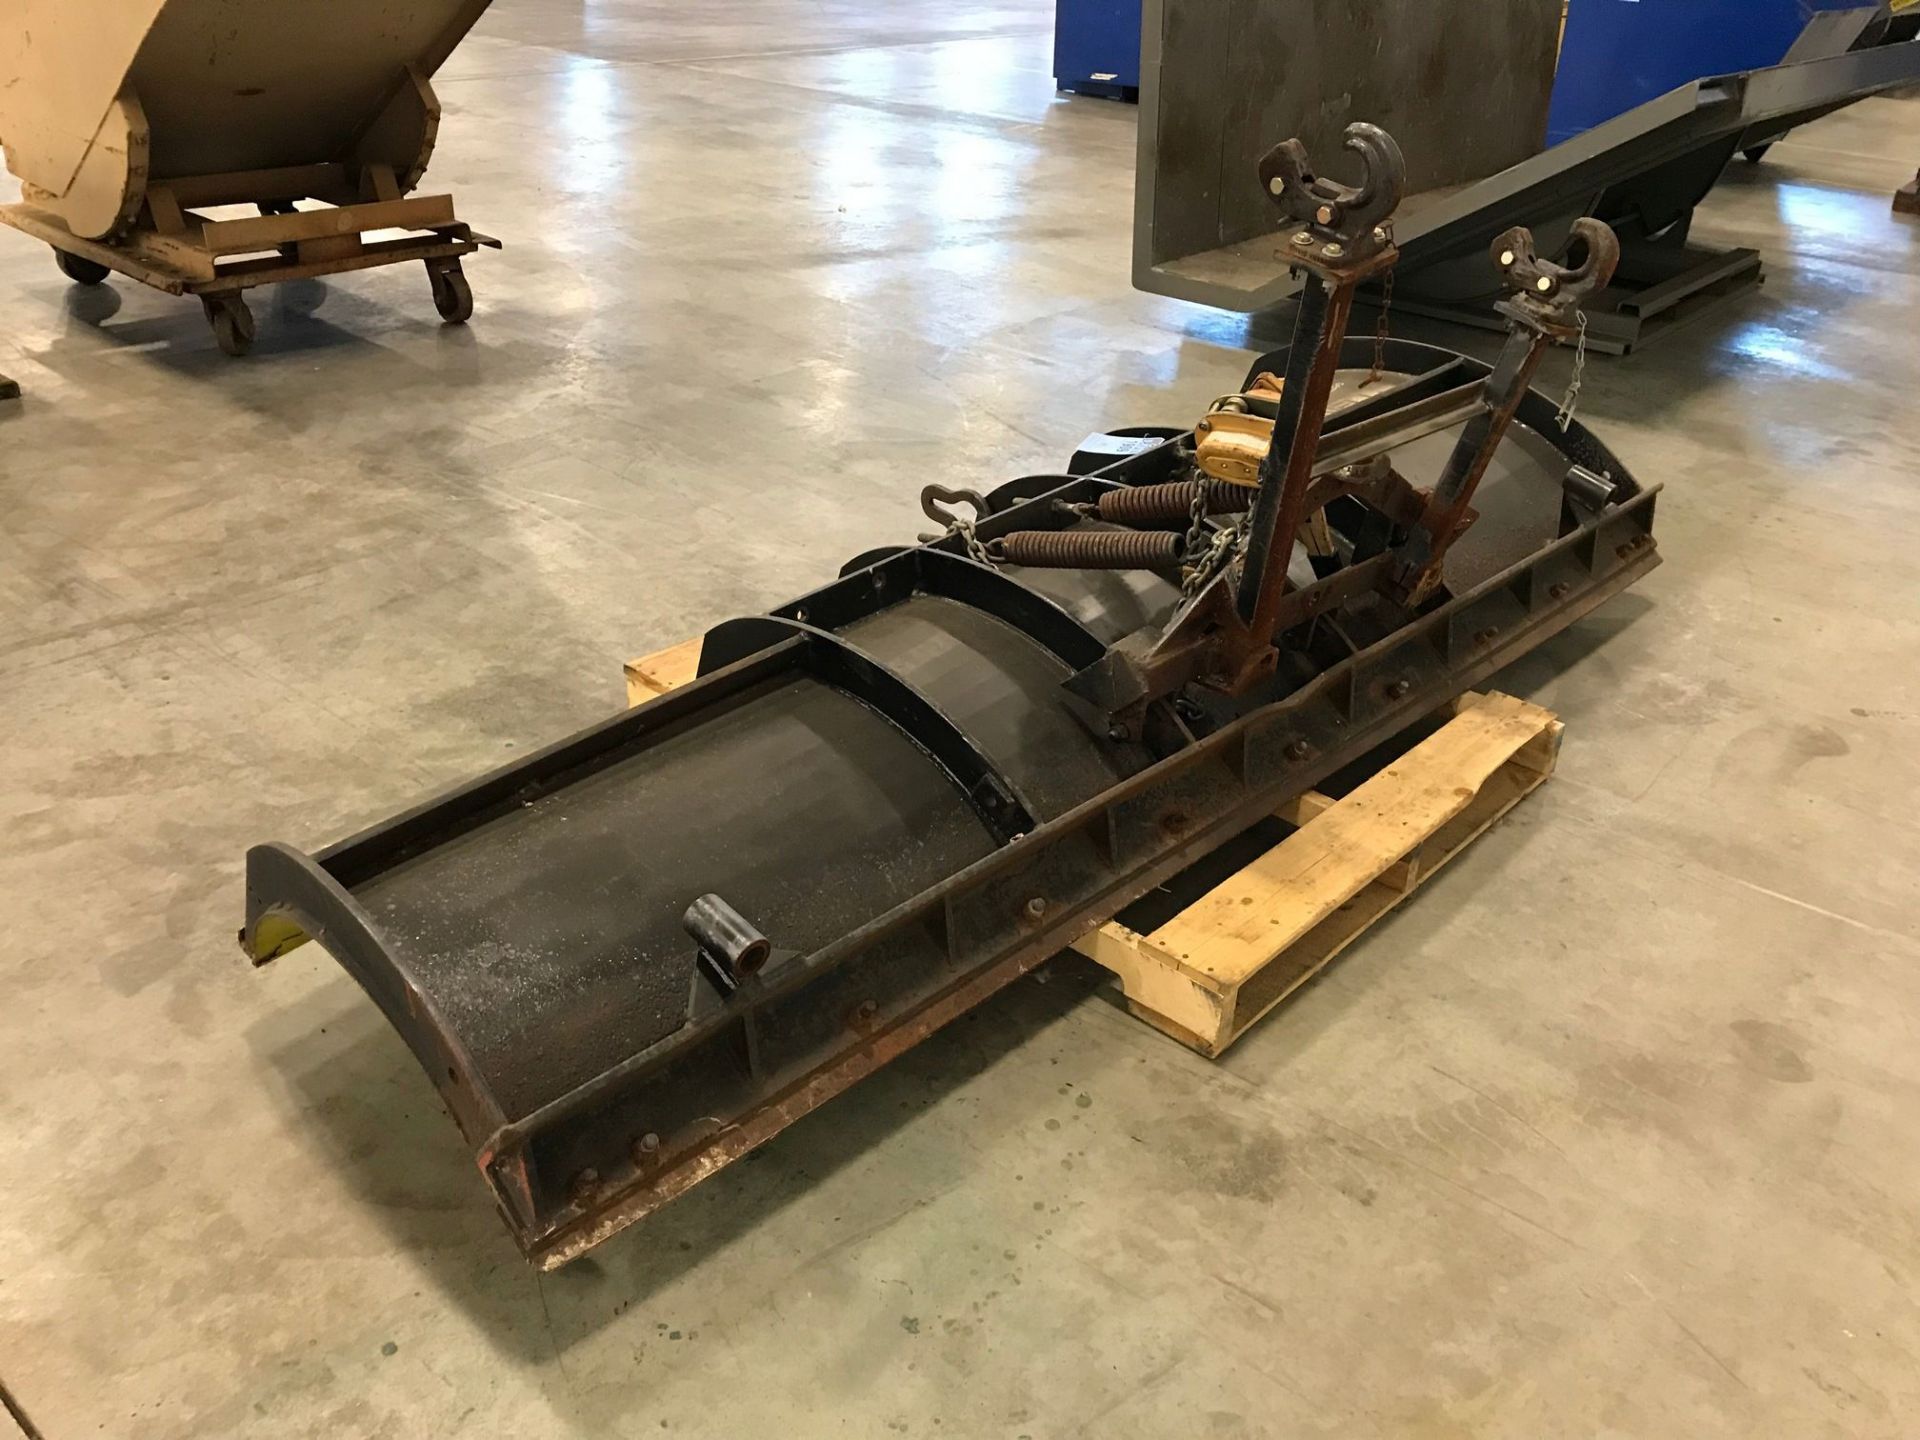 10' BONNELL MODEL 477-625 SNOW PLOW; S/N 1565, FITTED FOR TRACKMOBILES - Image 2 of 2